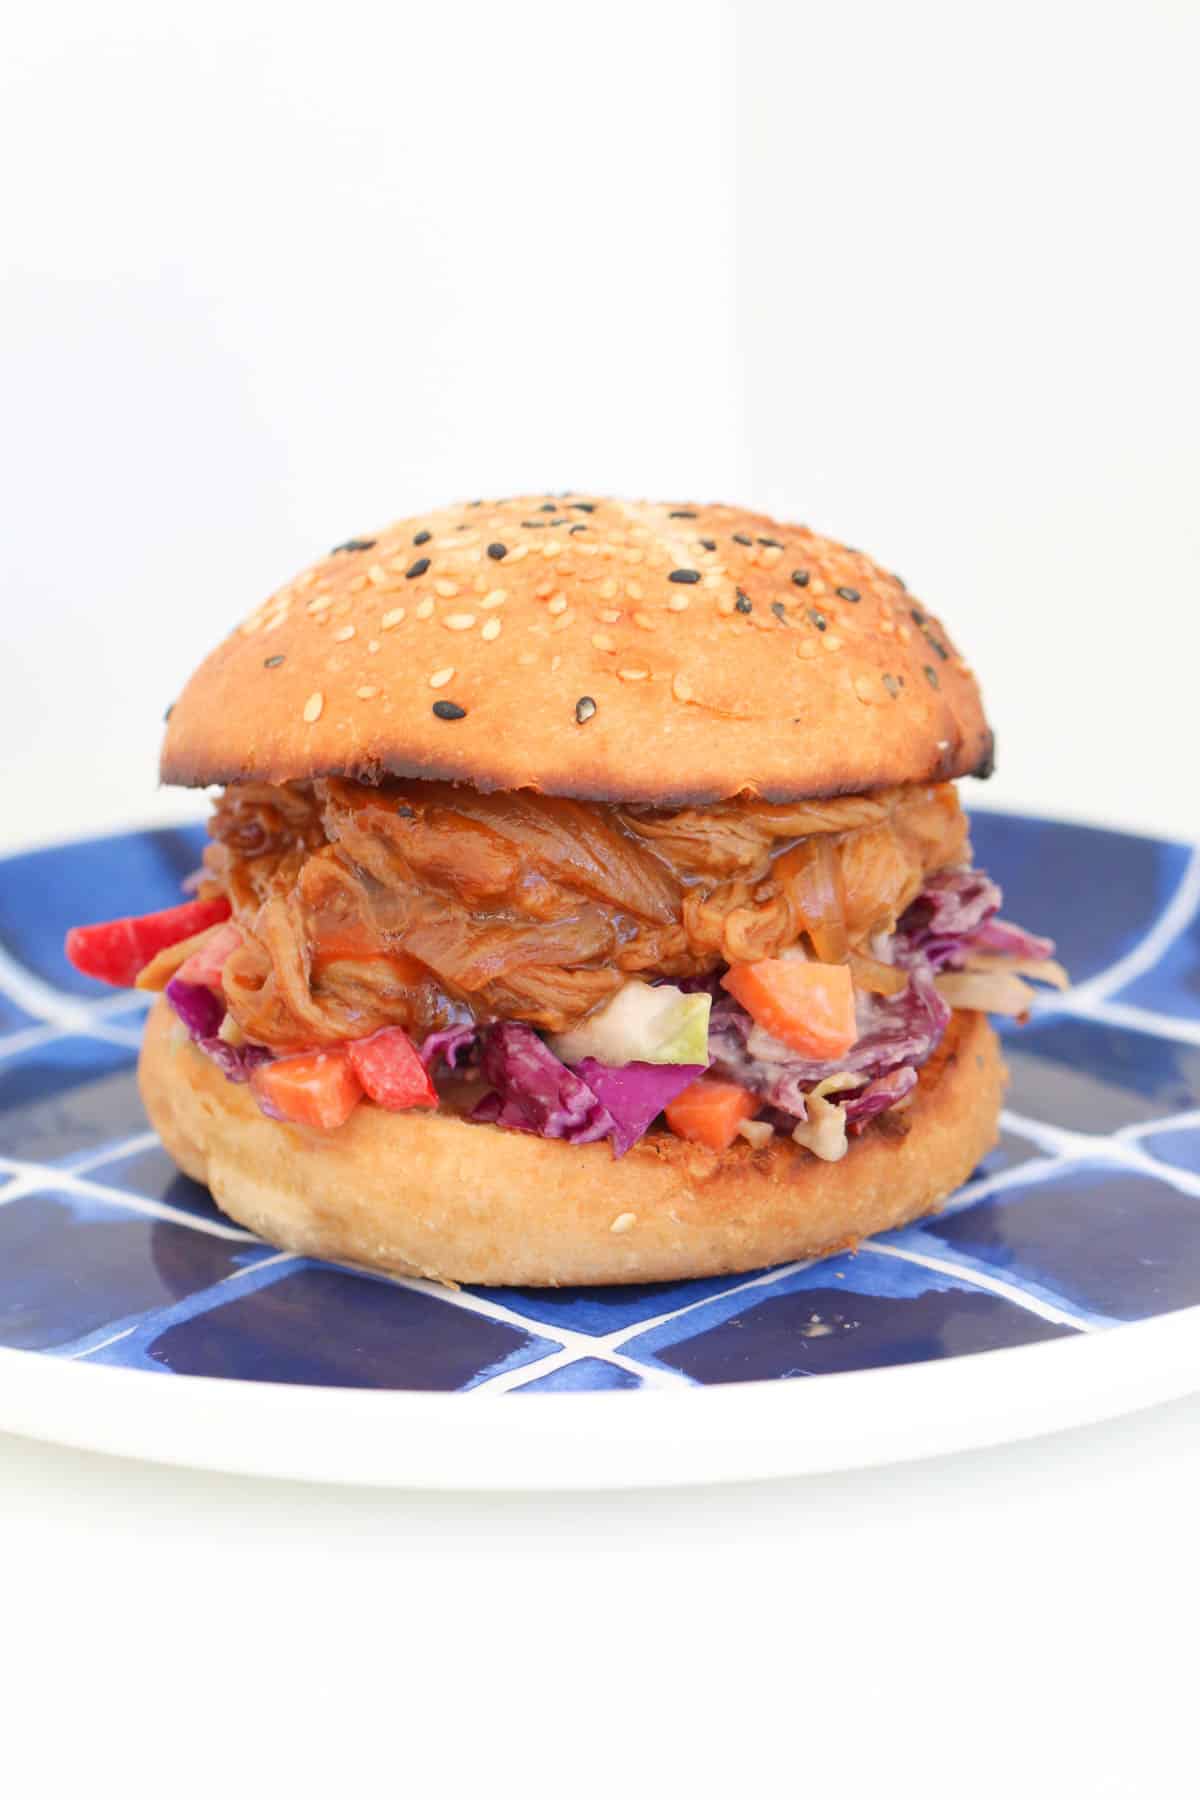 A pulled pork burger with slaw on a blue plate.